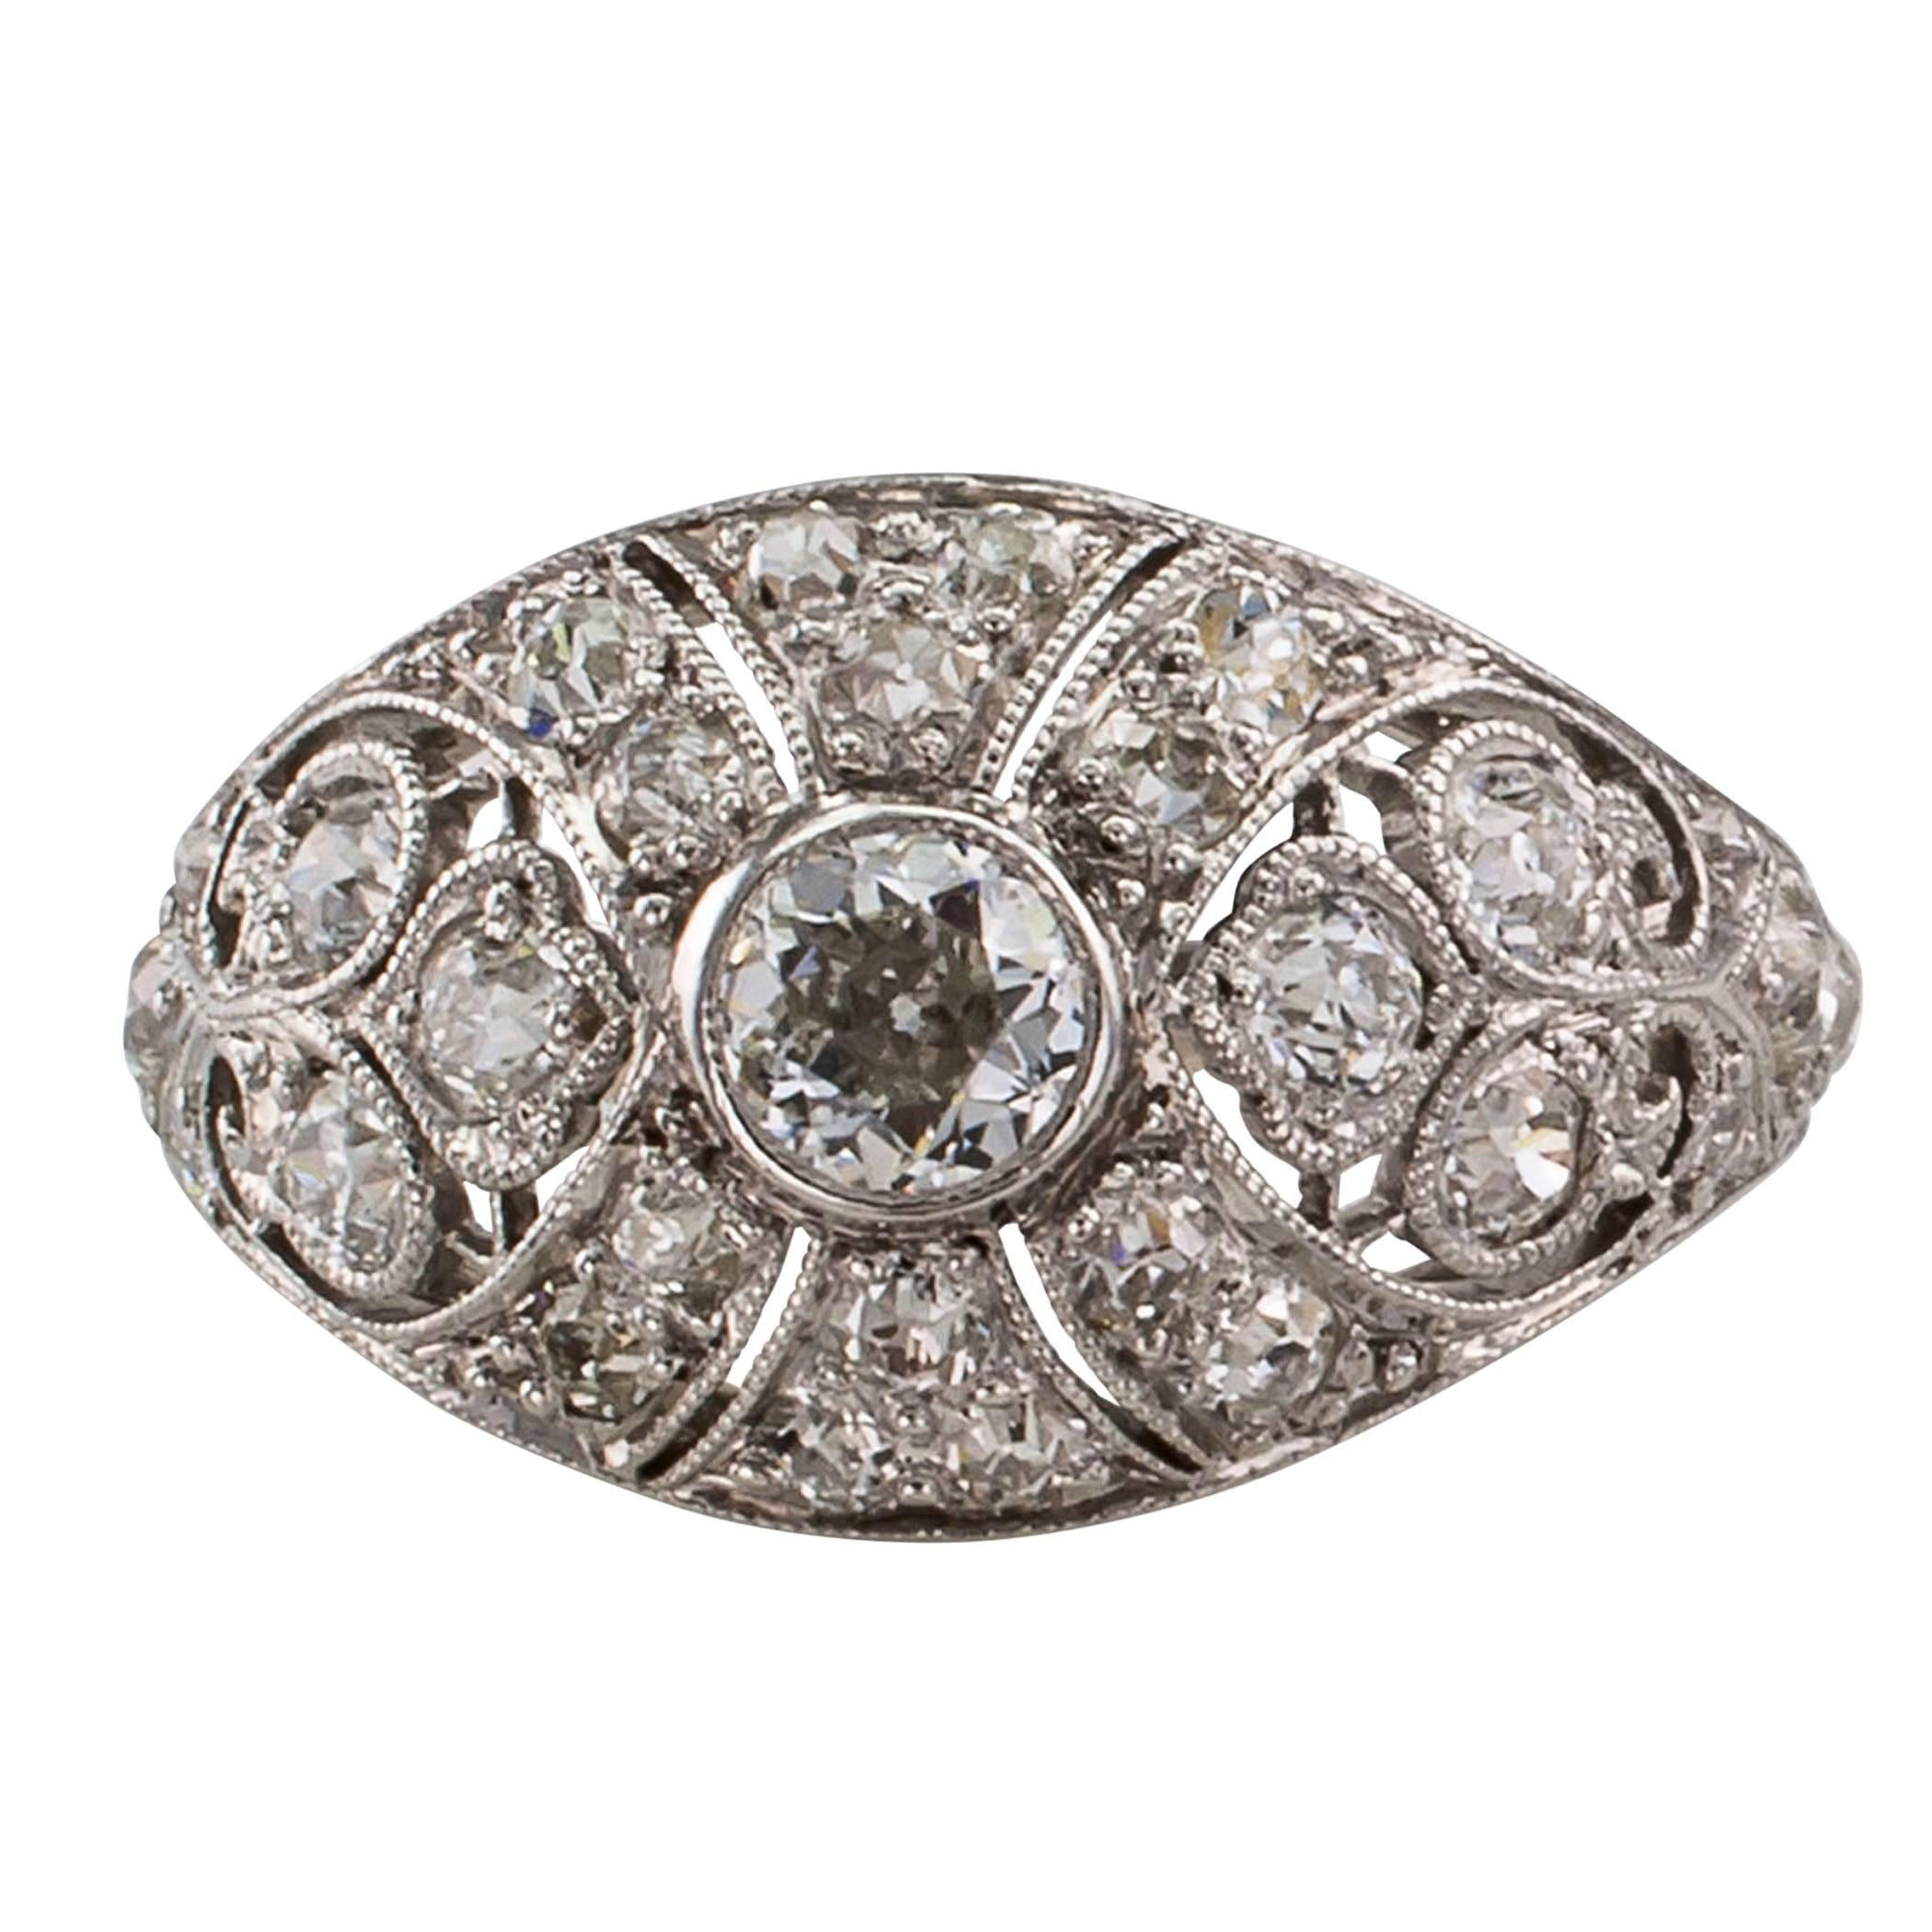 Edwardian 1910 diamond and platinum domed ring. The design centers upon a bezel-set old European-cut diamond on a platinum mounting set throughout with smaller round diamonds, the twenty-nine diamonds together totaling approximately 1.00 carat,